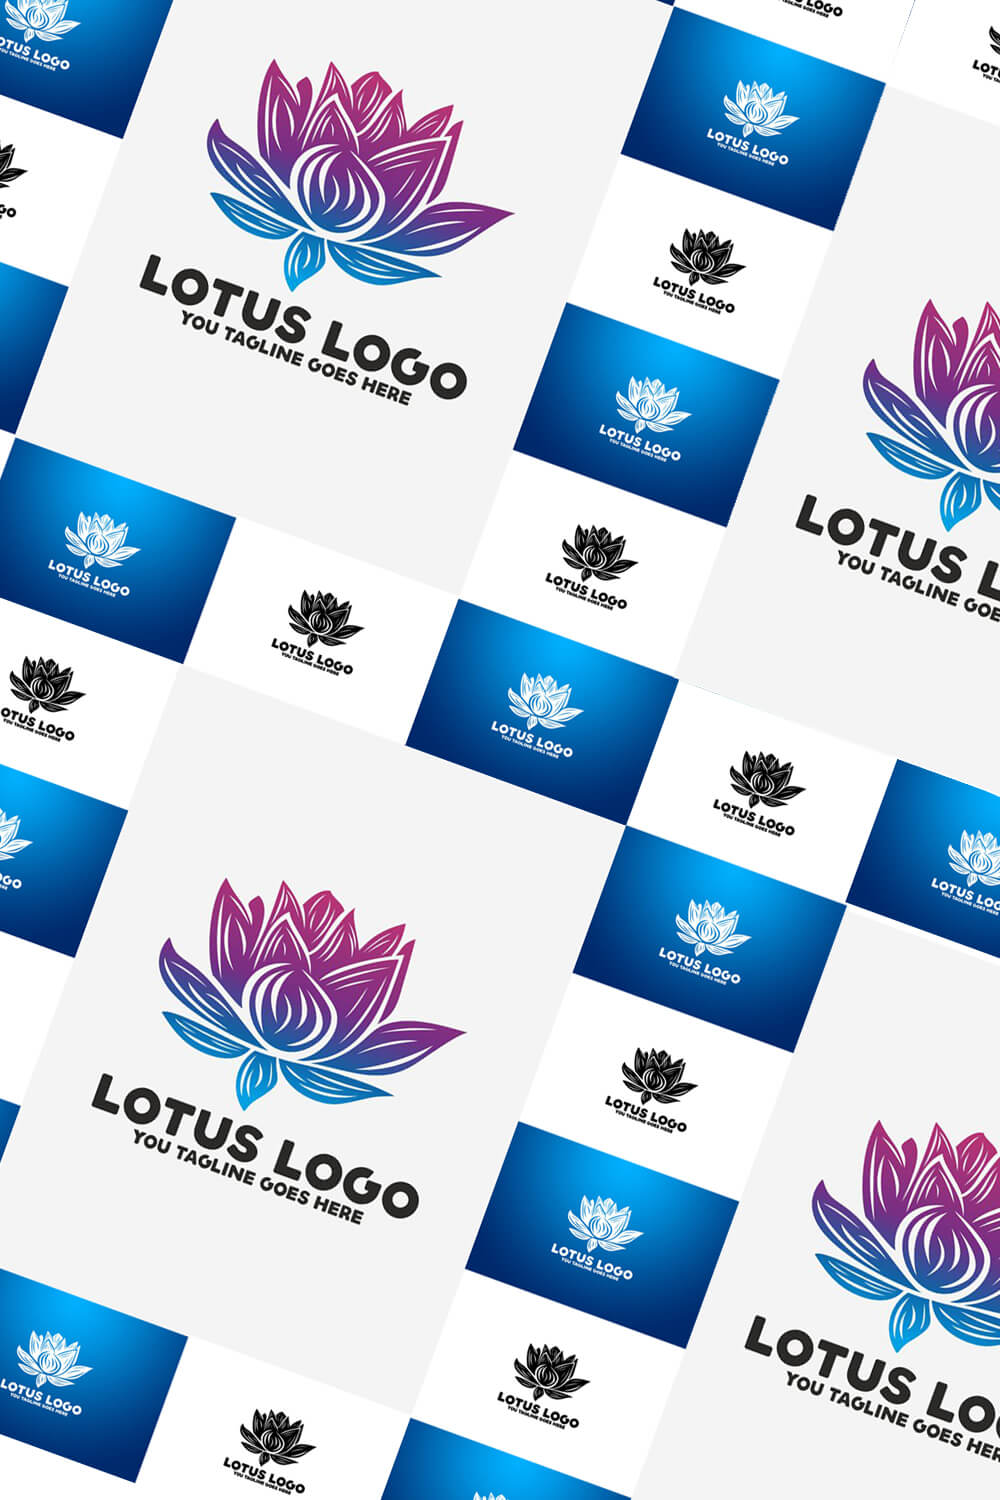 Big and small White/blue, purple/blue, and black/white Lotus logos placed at a 45-degree angle.